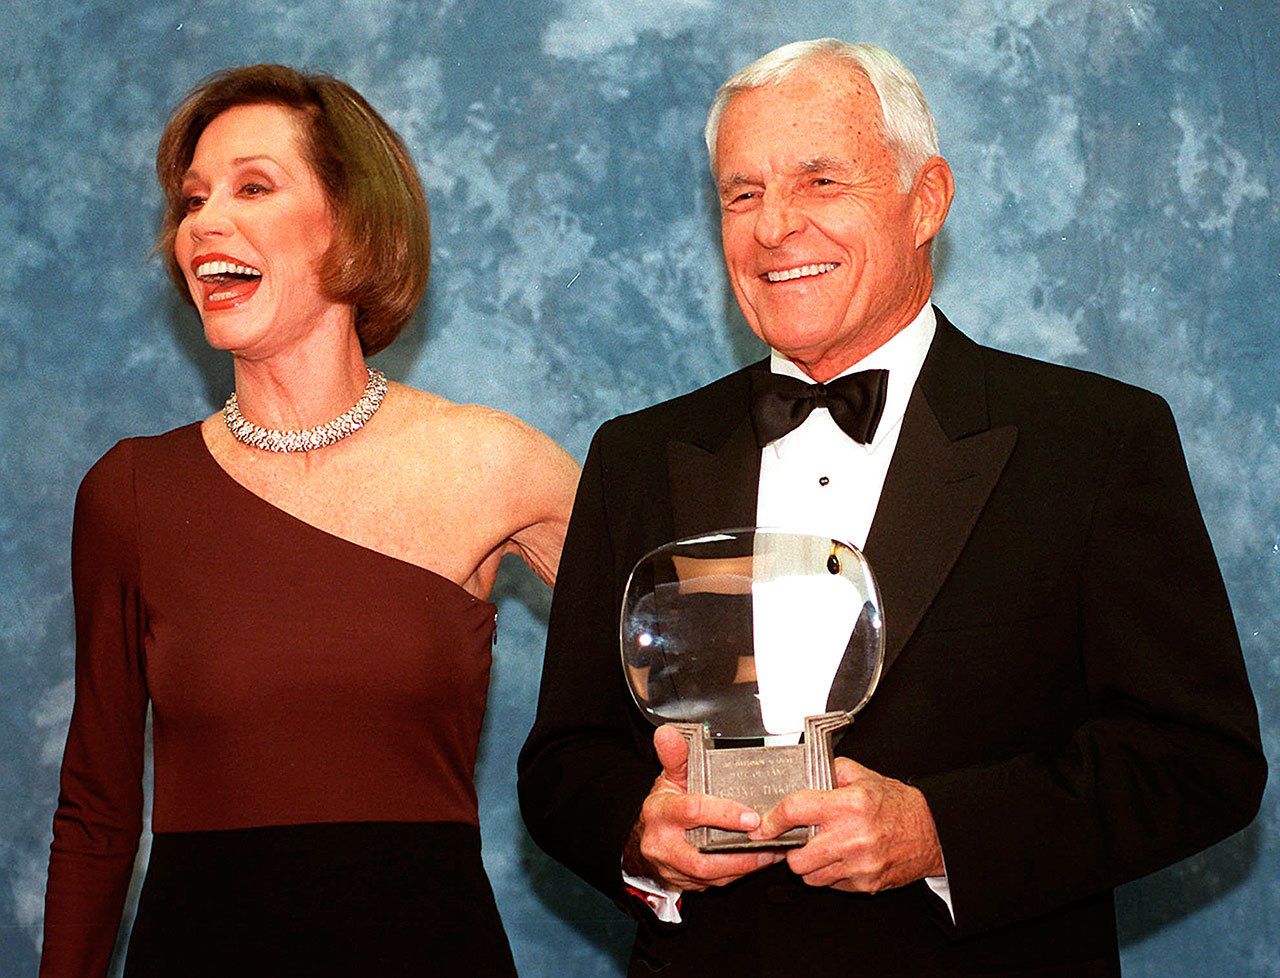 In this 1997 photo, Television executive Grant Tinker holds up his Hall of Fame award alongside his ex-wife, Mary Tyler Moore, at the Academy of Television Arts & Sciences’ 13th Annual Hall of Fame induction ceremonies in the North Hollywood section of Los Angeles. Tinker, who brought “The Mary Tyler Moore Show” and other hits to the screen as a producer and a network boss, died Monday, Nov. 28, at his home in Los Angeles, according to his son, Mark Tinker. (AP Photo/Chris Pizzello, File)